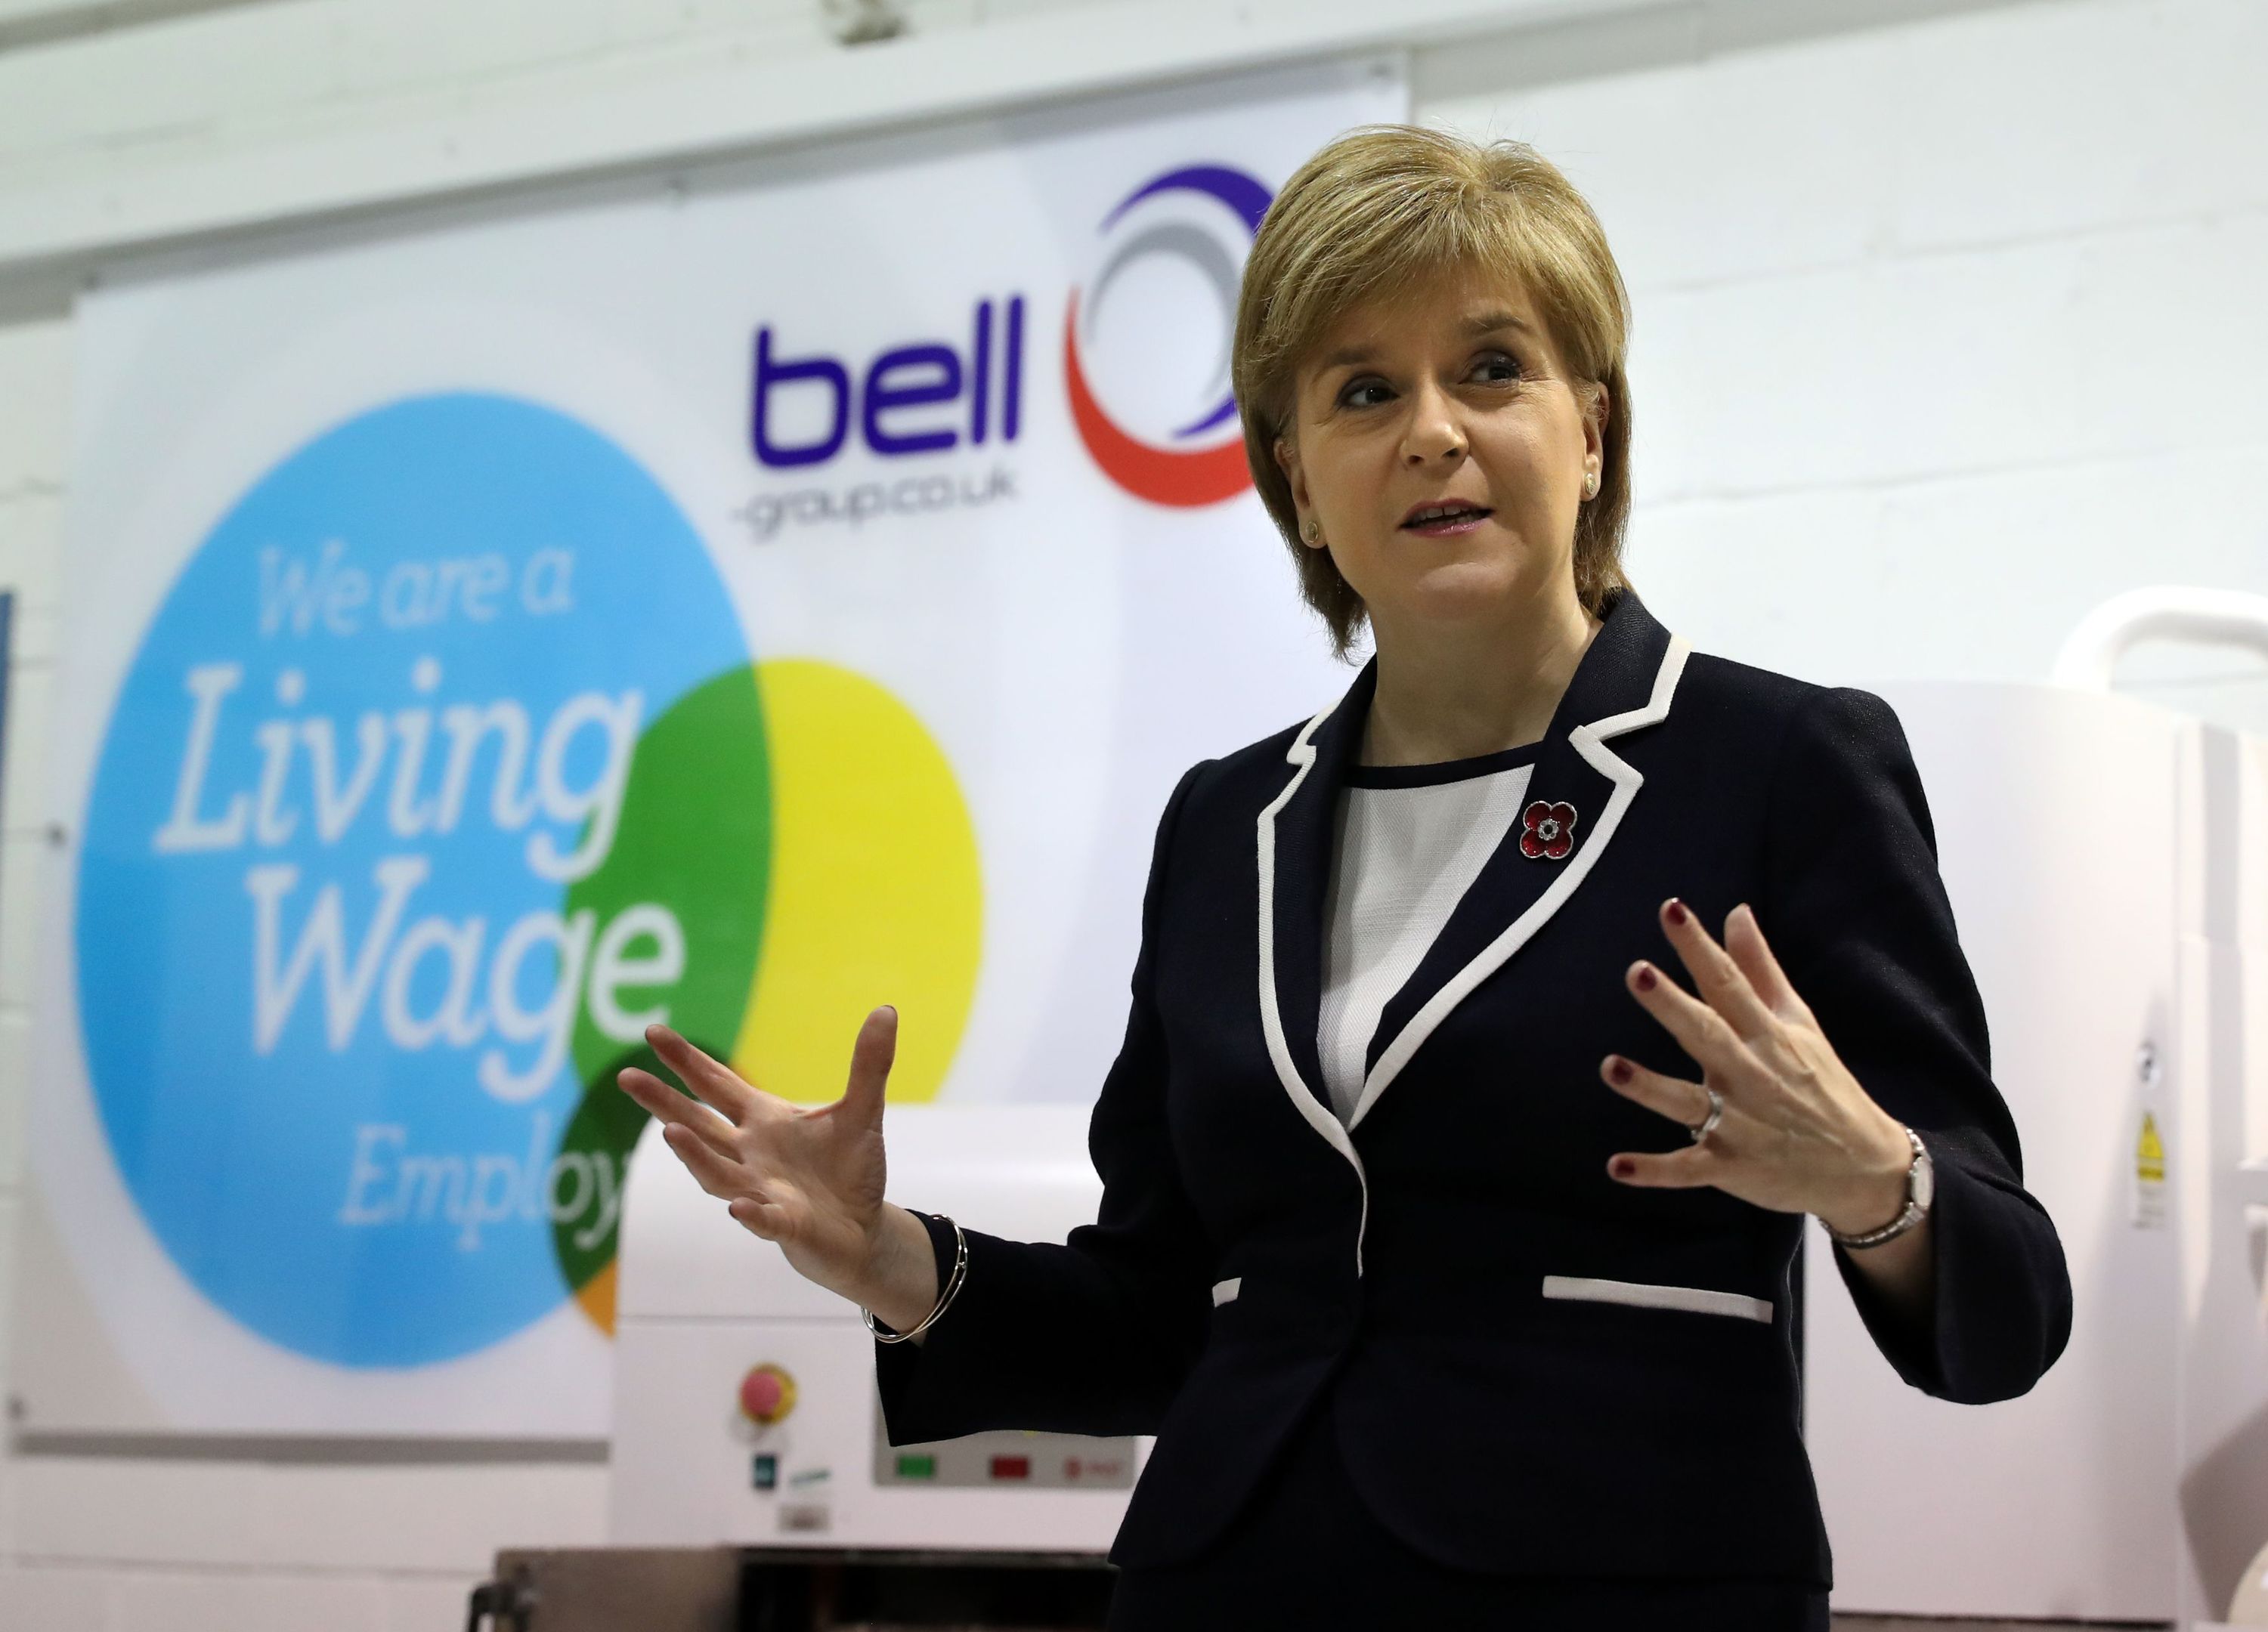 Scotland's First Minister Nicola Sturgeon at the Bell Group announces the country's new living wage.